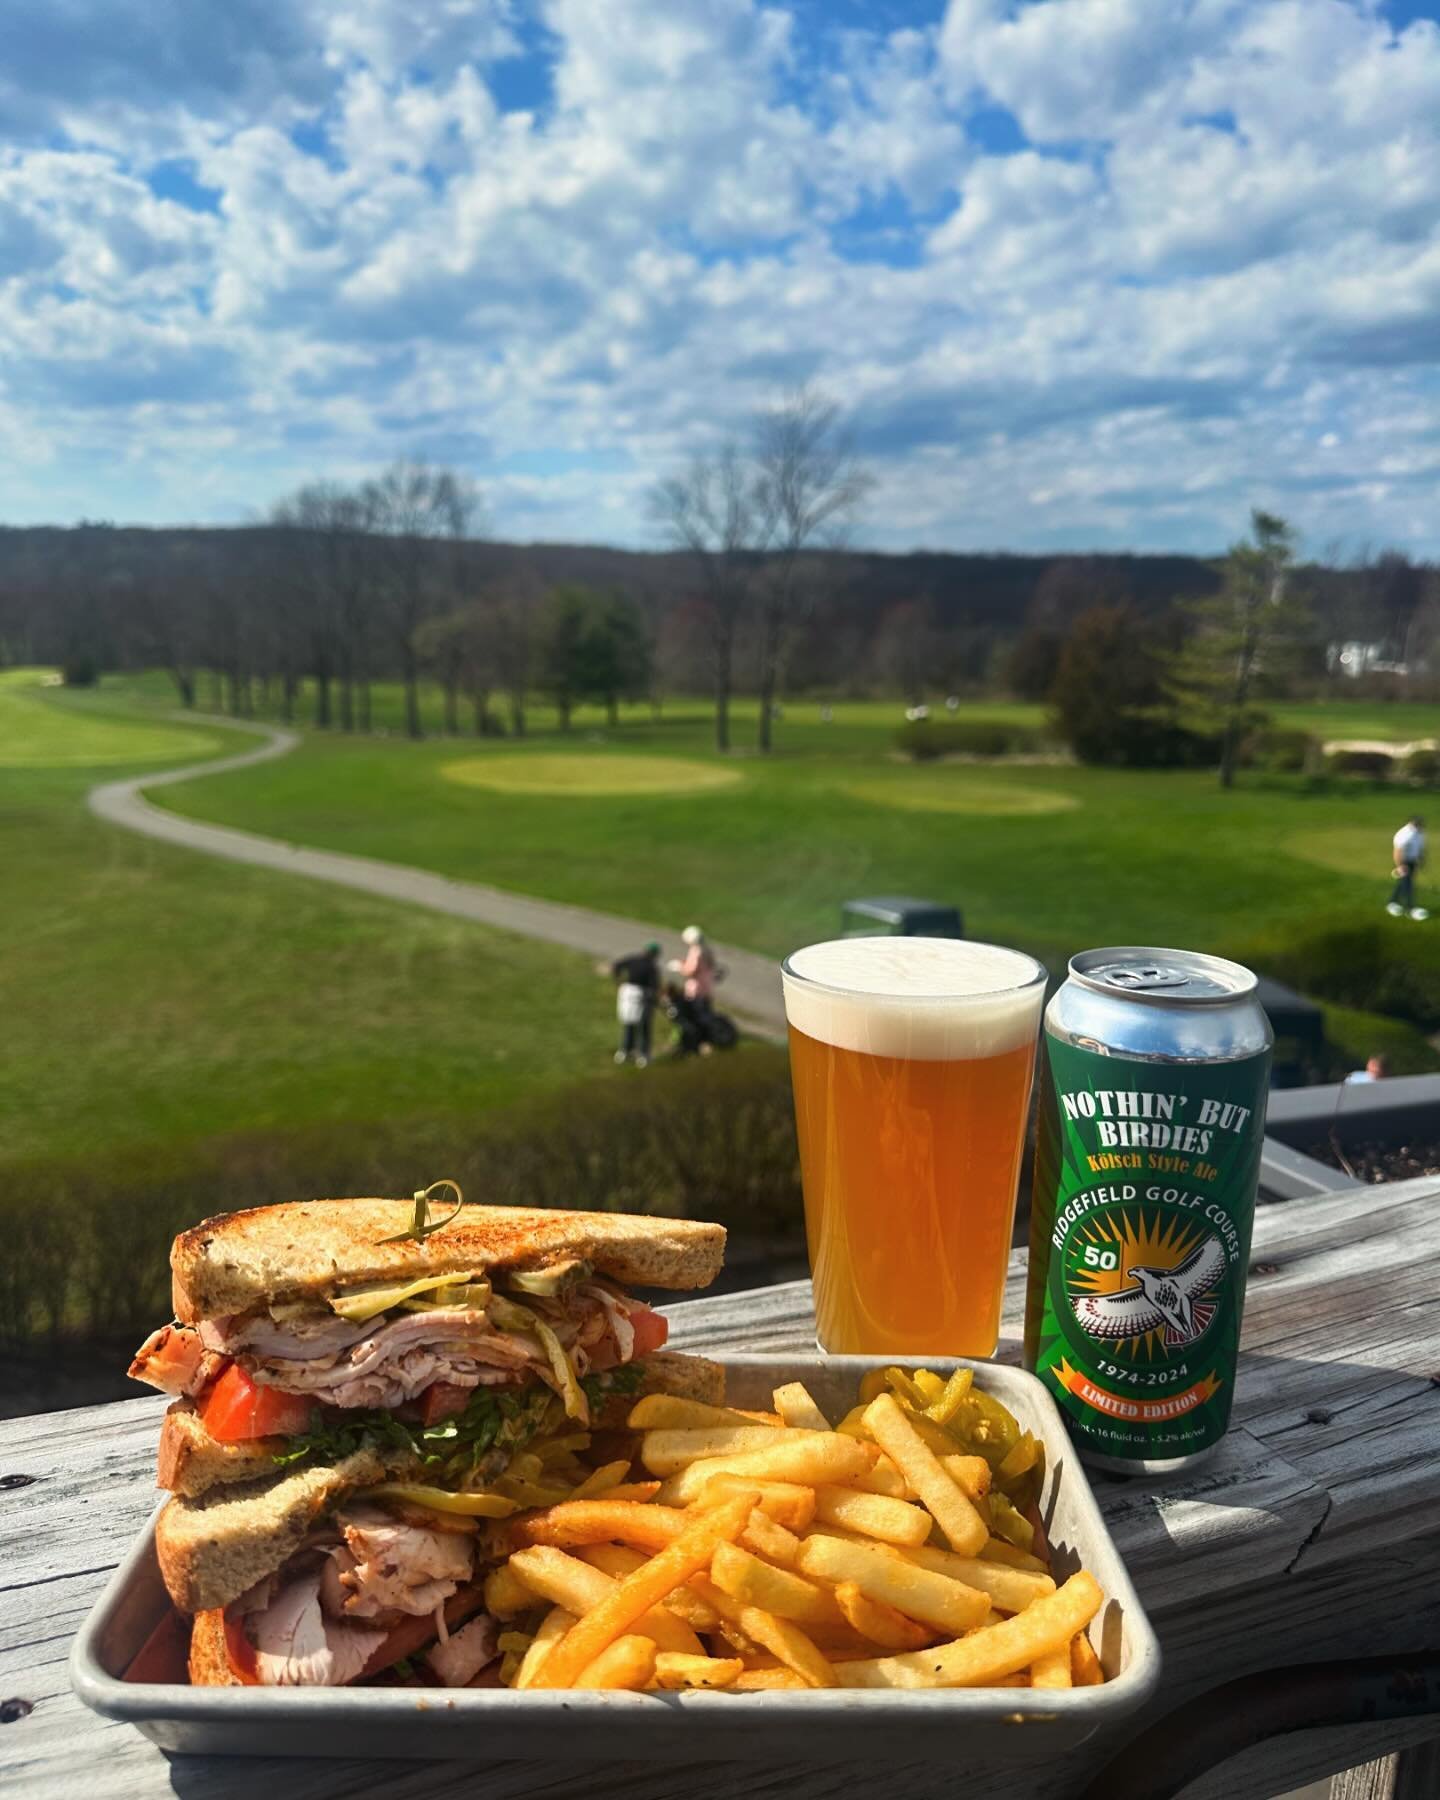 What's better than a fresh smoked turkey sandwich and a limited edition beer?... 🥪🍻

Nothing

Comes join us for lunch and dinner @odeensbbq_at_rgc 

Now serving our 50th year anniversary golf course beer! &quot;Nothin' But Birdies&quot; is a tasty 